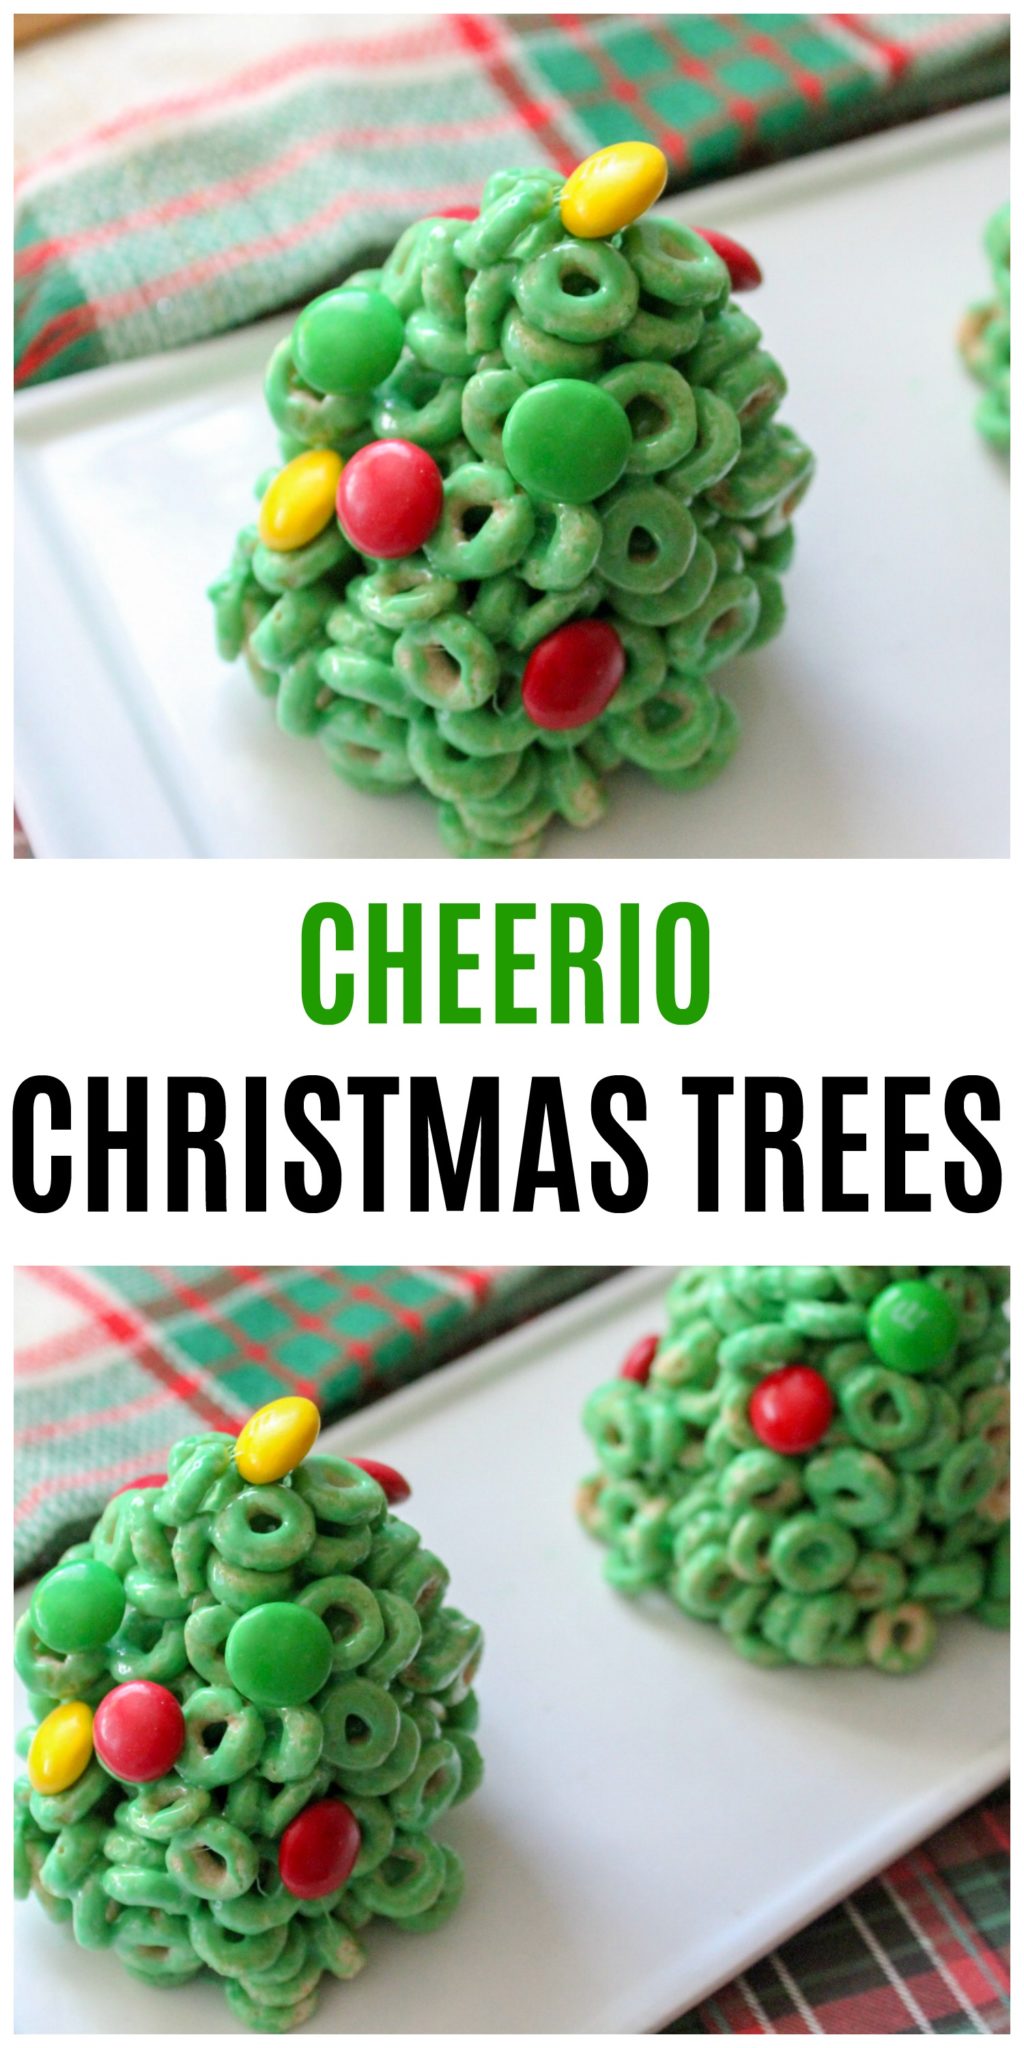 Cheerio Christmas Trees Recipe Makes a Great Holiday Snack